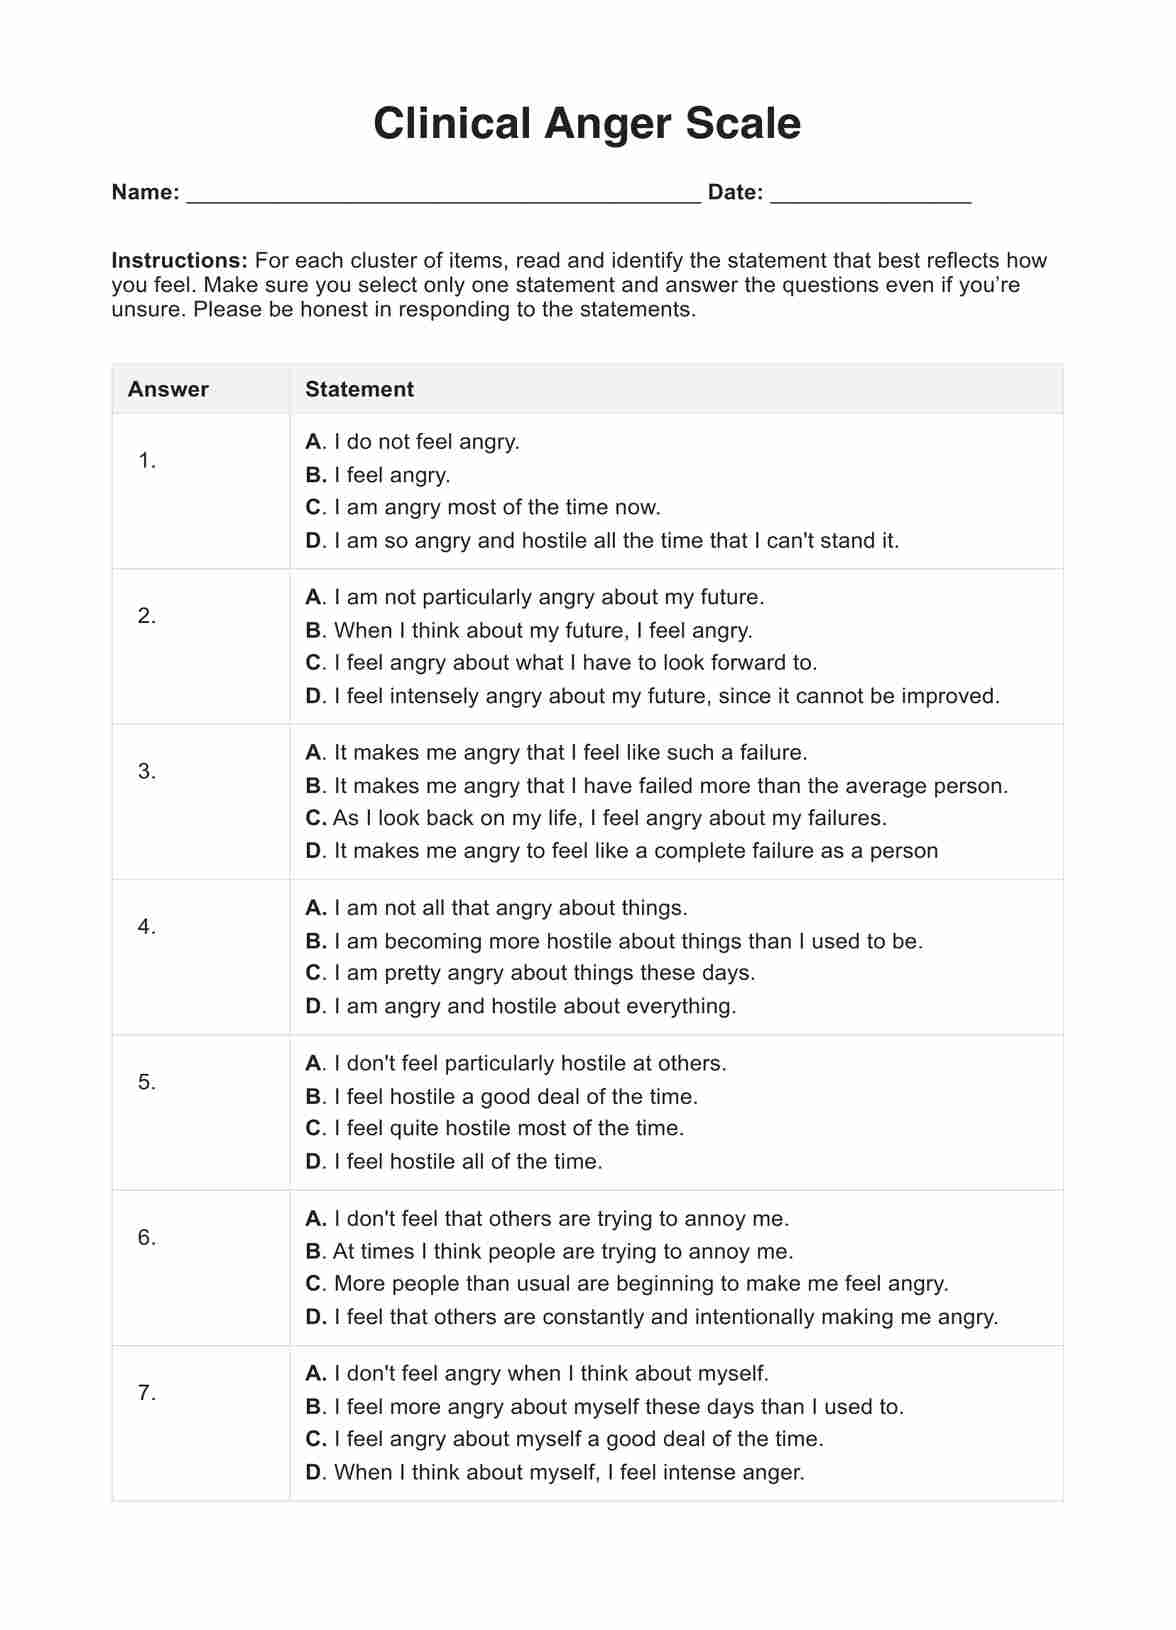 Clinical Anger Scale PDF Example